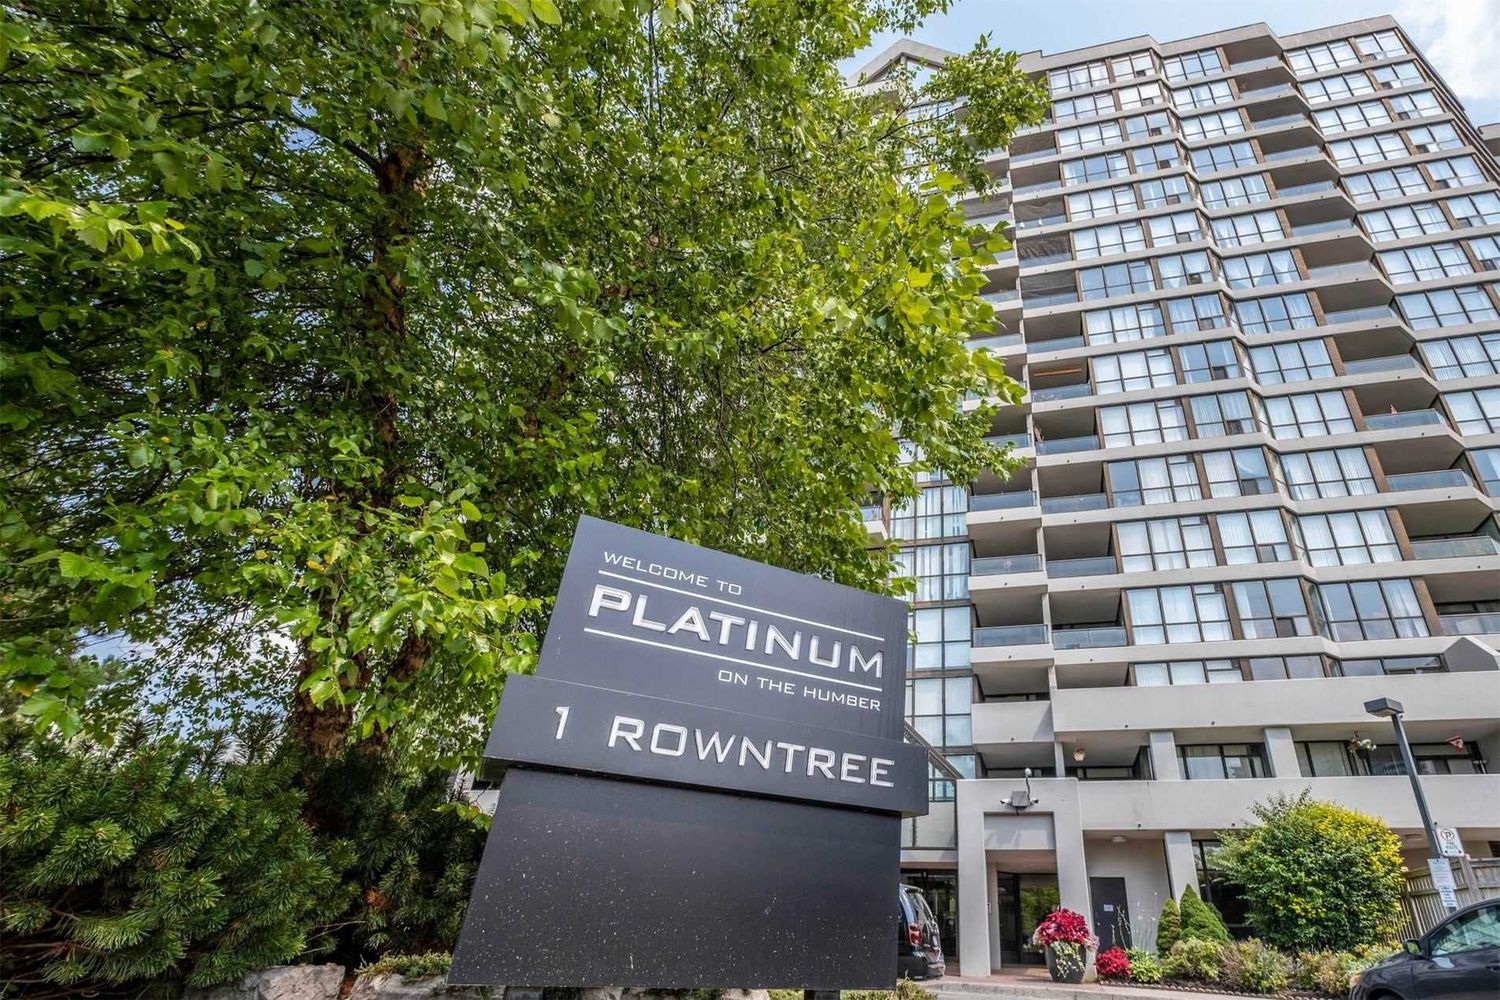 1 Rowntree Road. Platinum on the Humber III Condos is located in  Etobicoke, Toronto - image #1 of 2